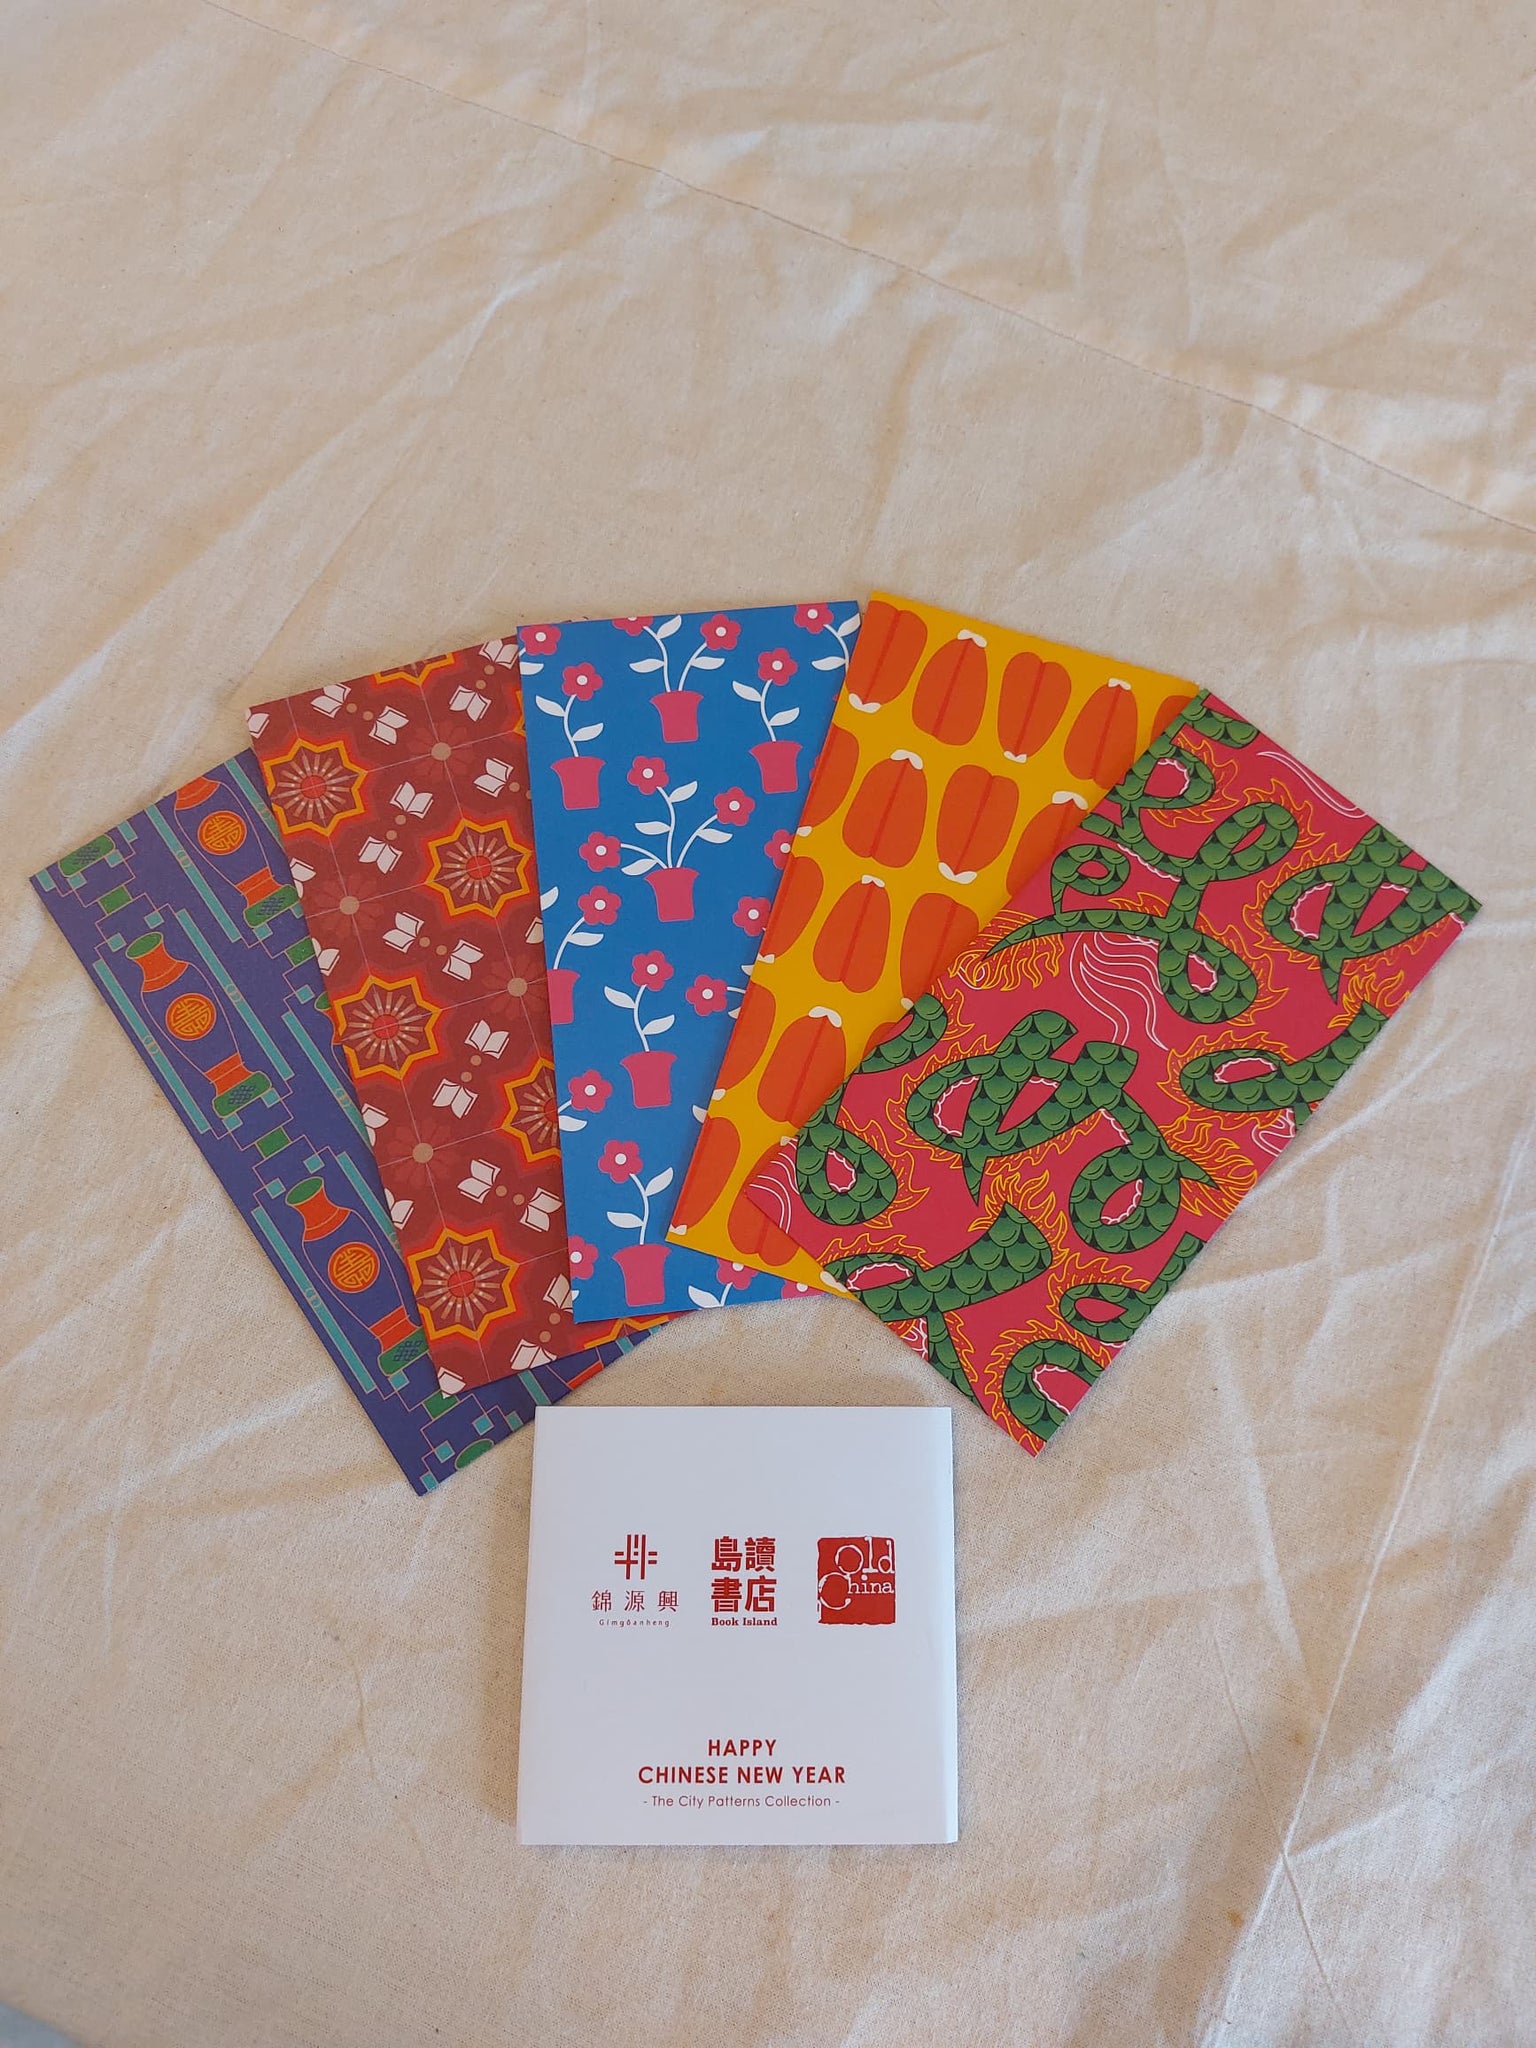 City Culture Enterprise 乌读书店 x 锦源兴 x Old China 联名红包封 Red Packet, Ang Pao